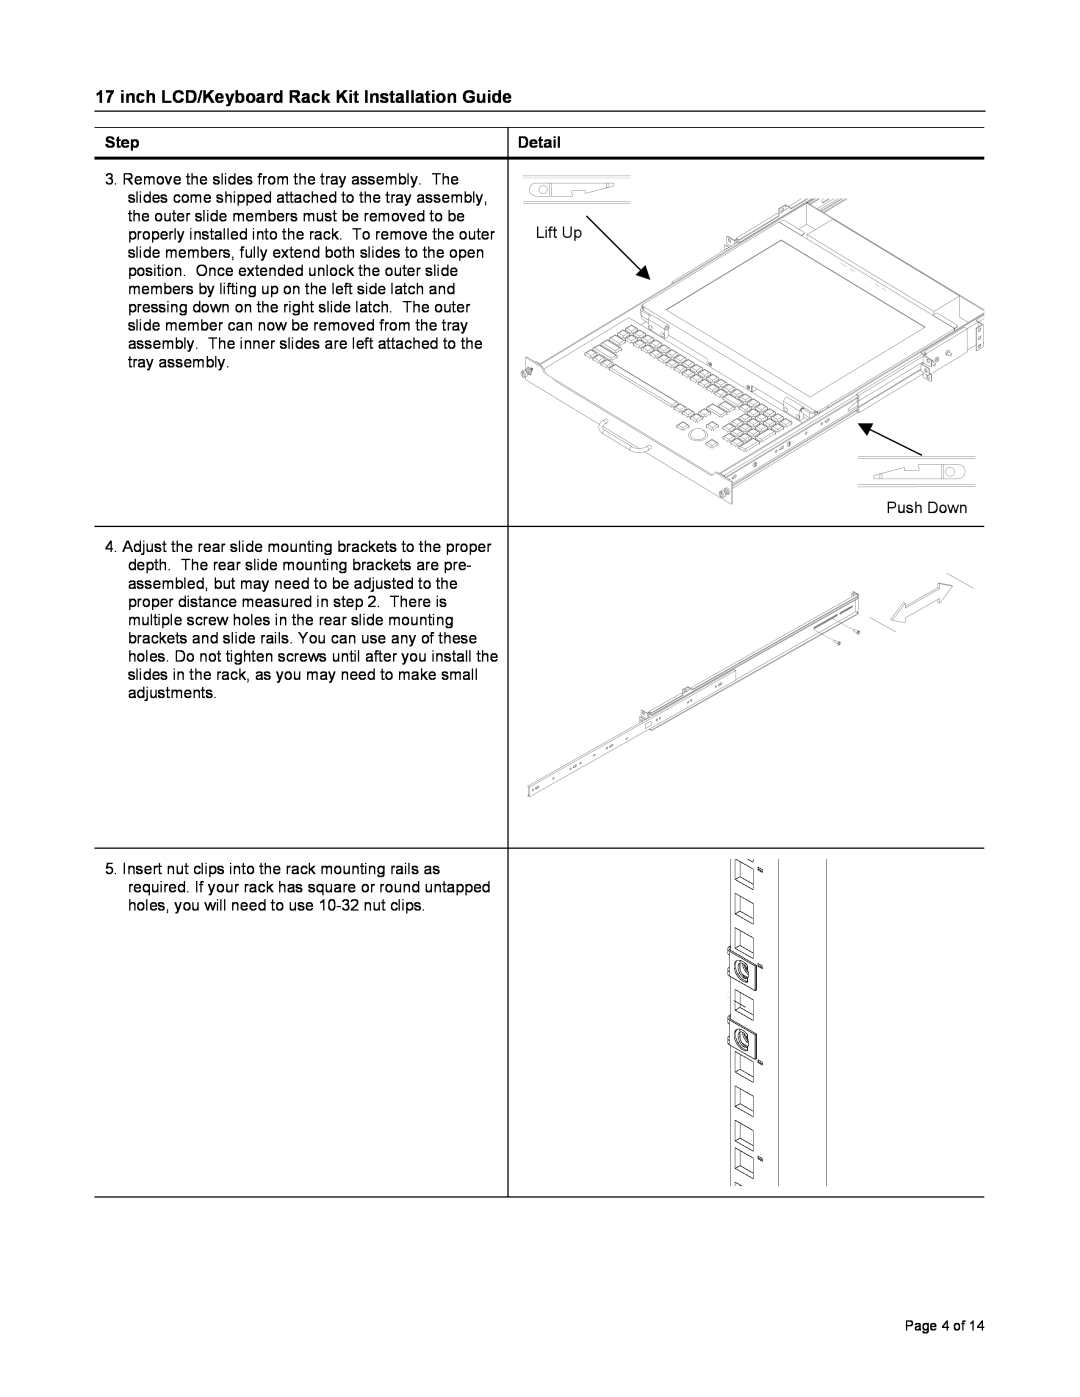 Neuro Logic Systems RFT-17 specifications inch LCD/Keyboard Rack Kit Installation Guide, Step, Detail 